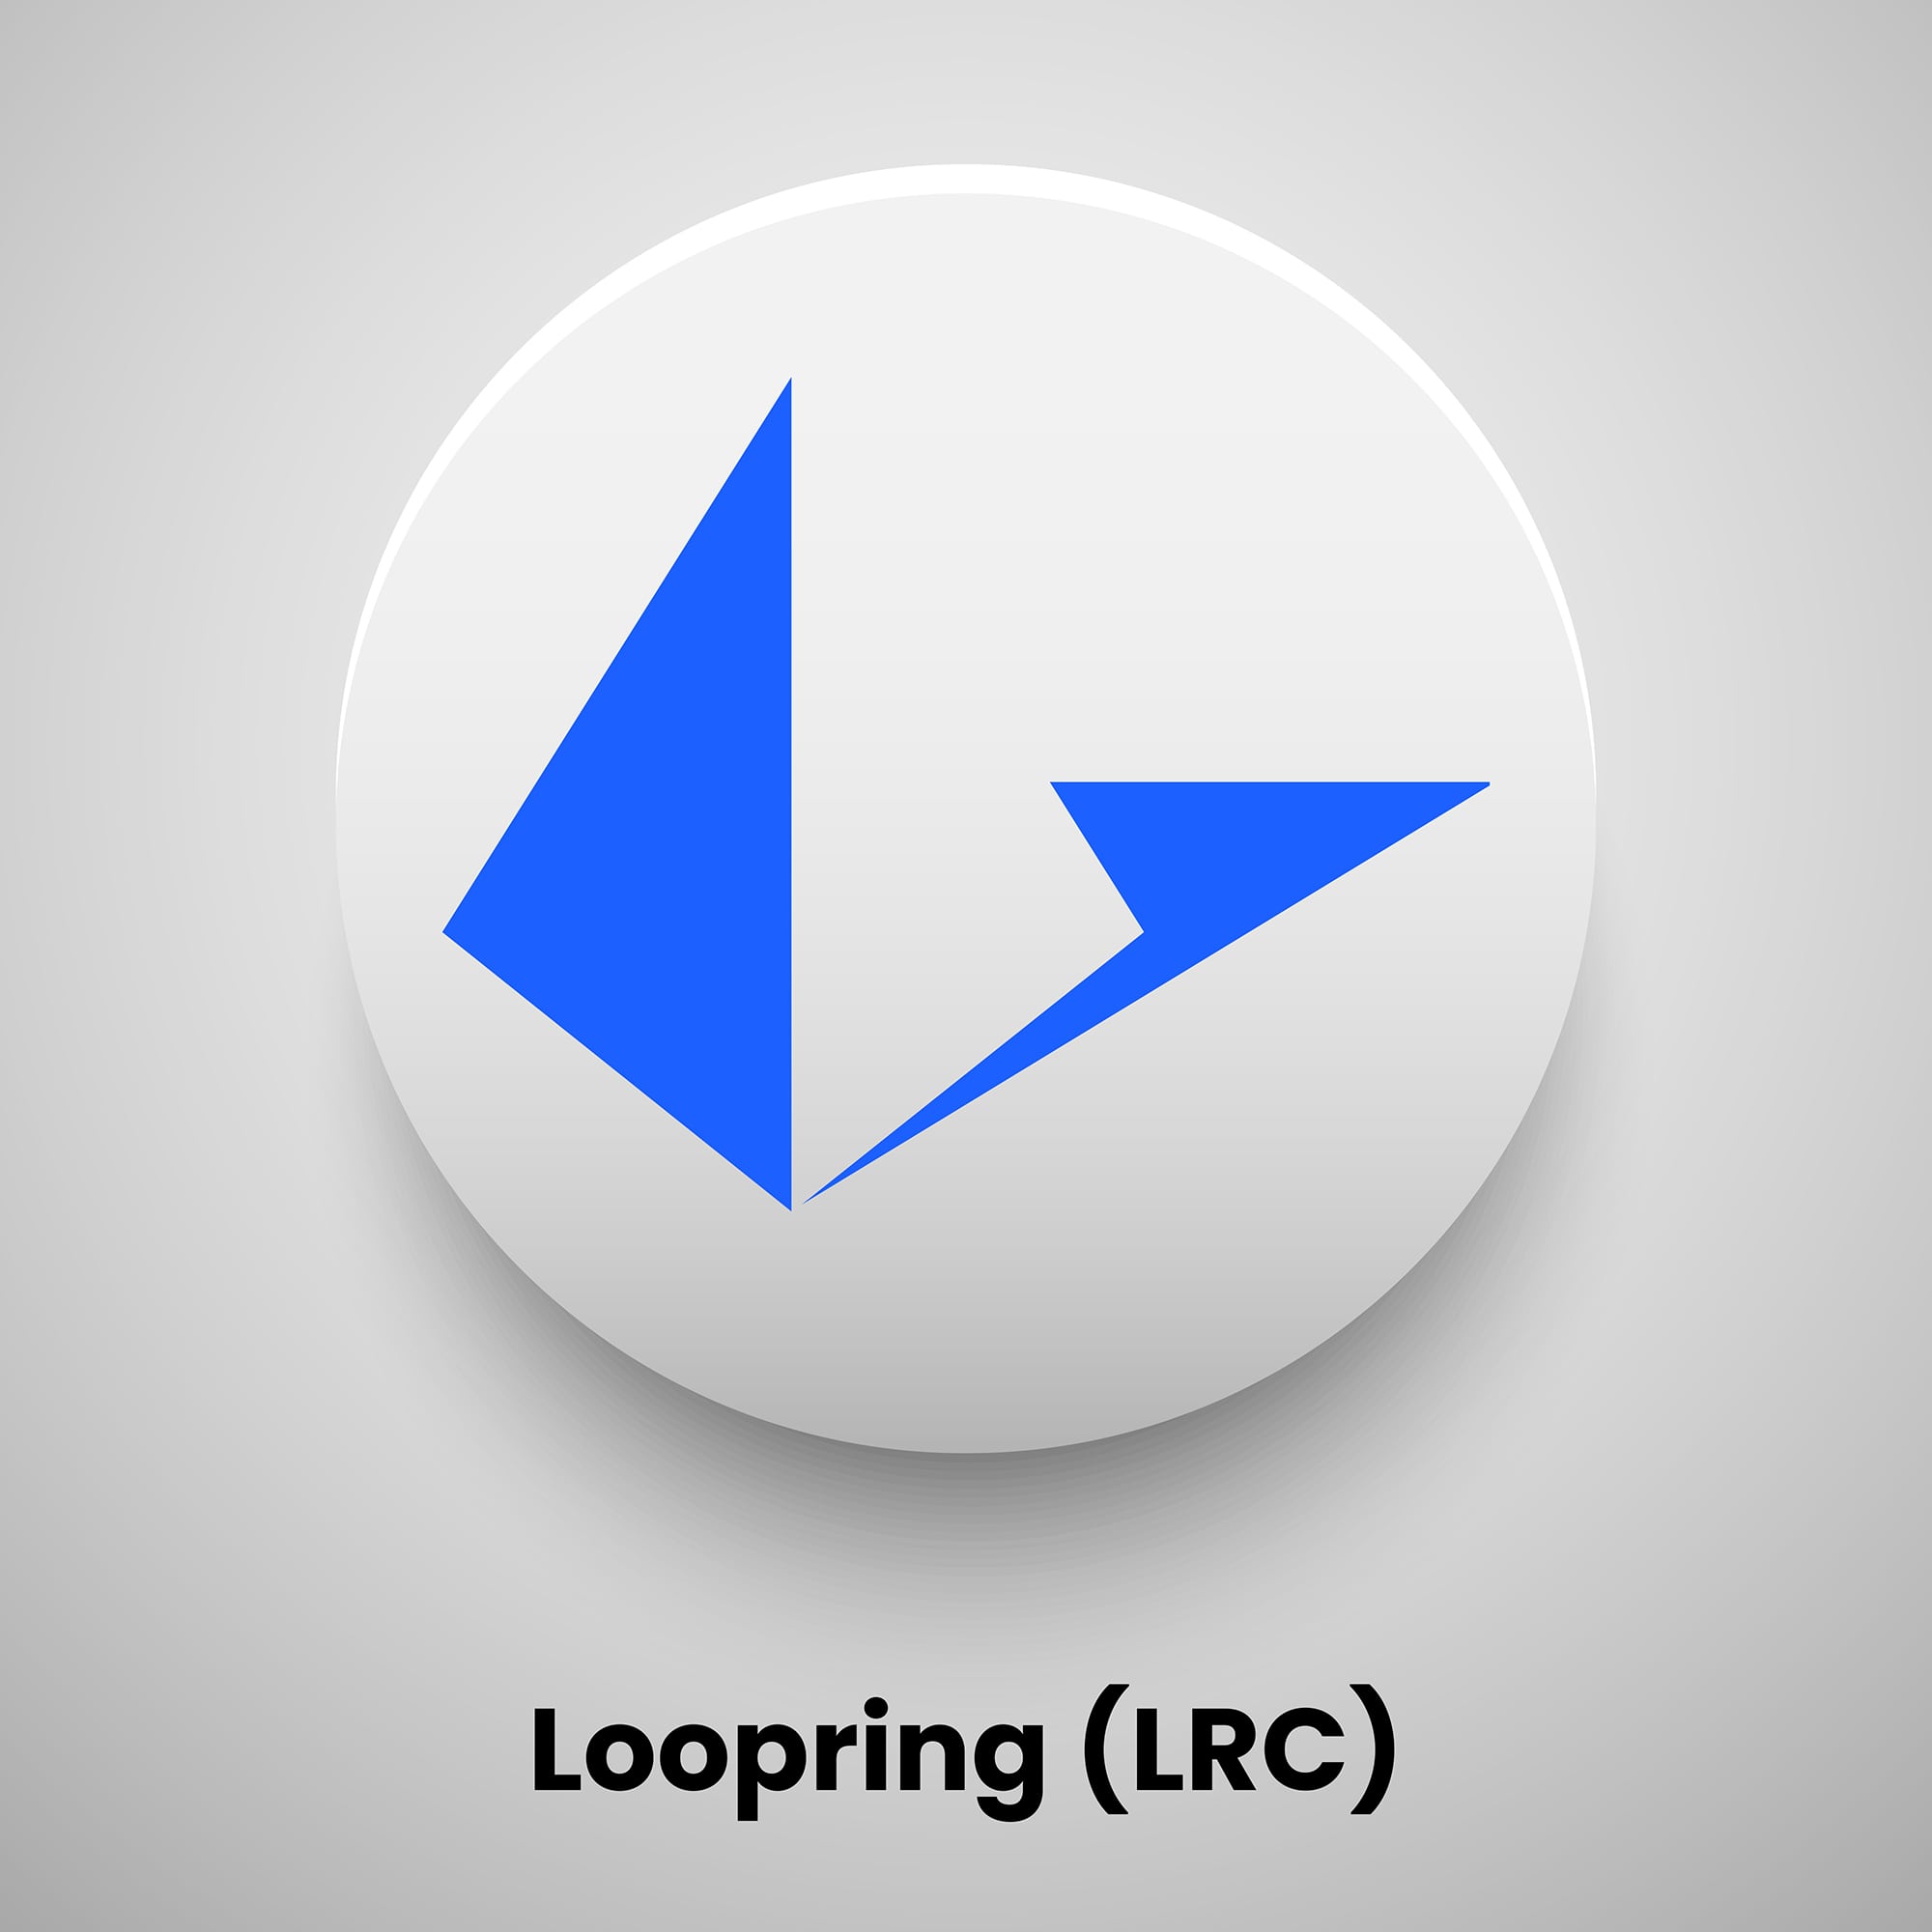 Loopring (LRC) crypto currency logo free vector download